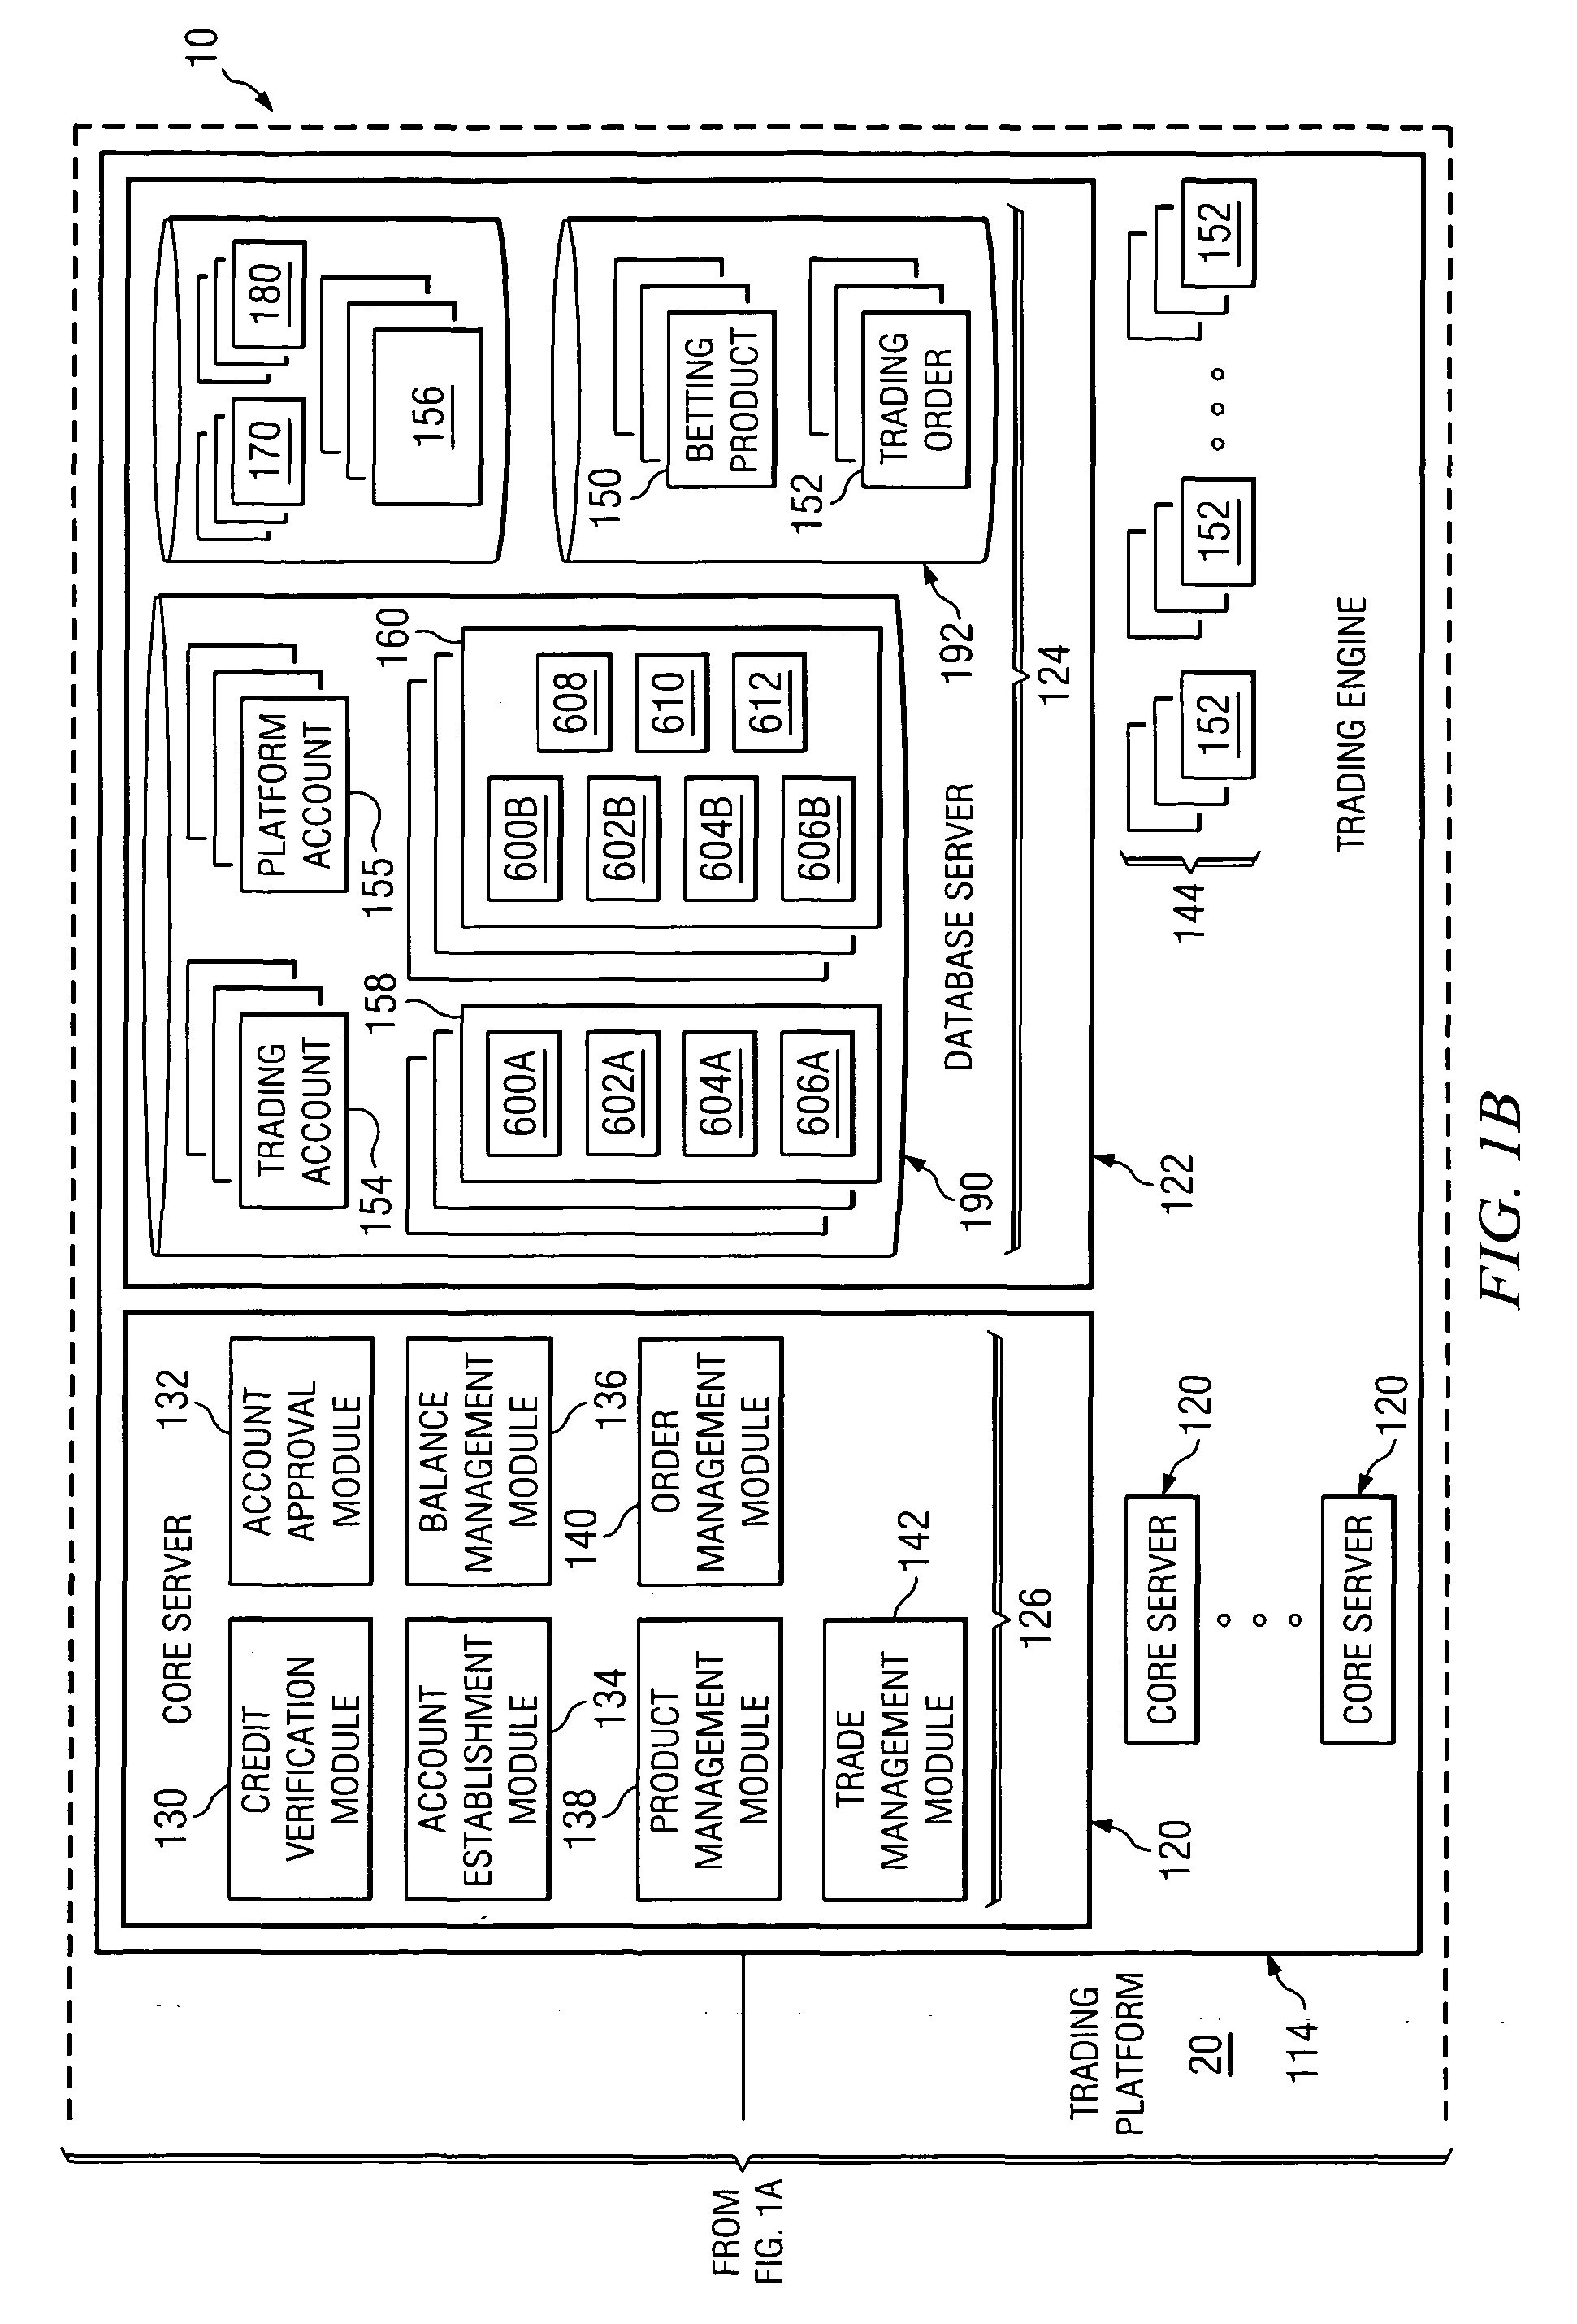 System and method for providing access to and managing account activity for an online account